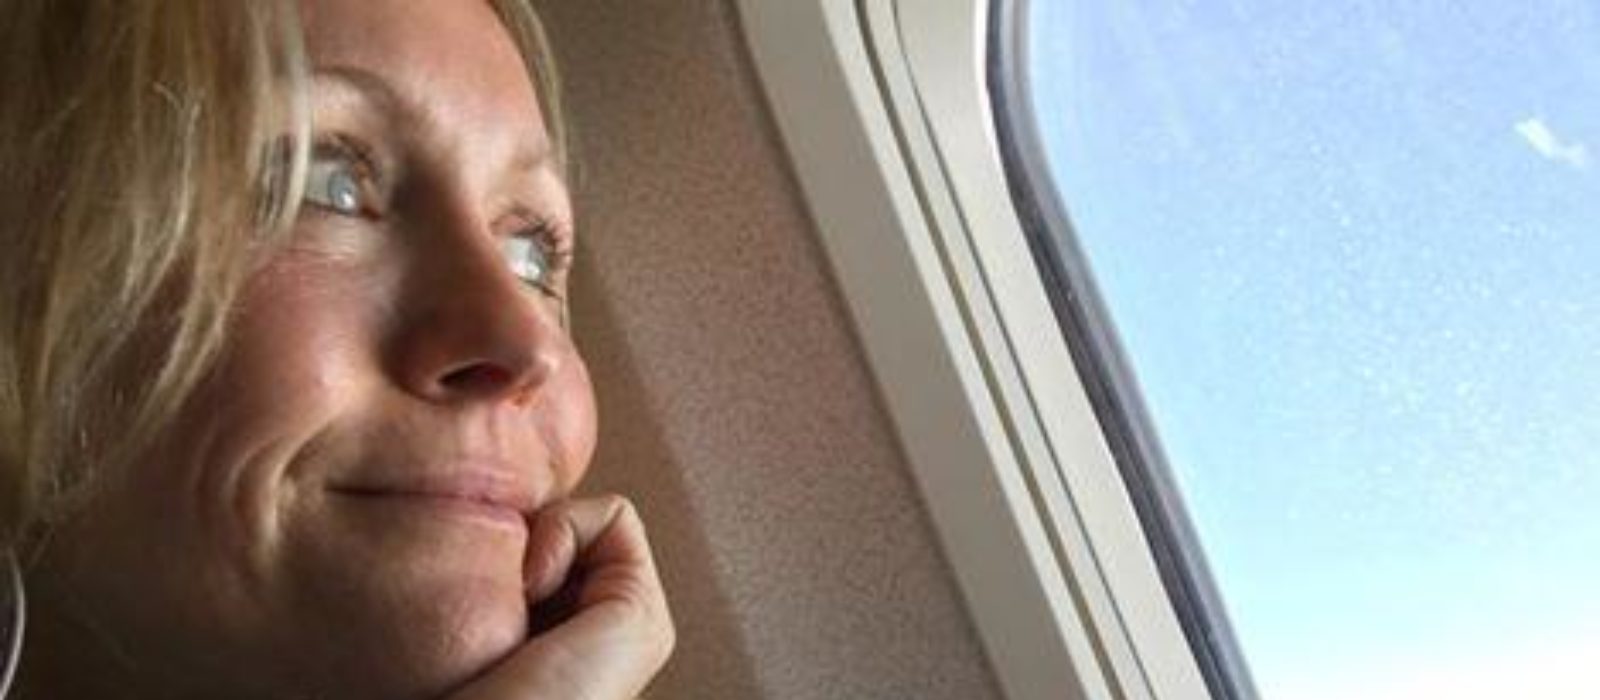 Miriam looking out the window of a plane